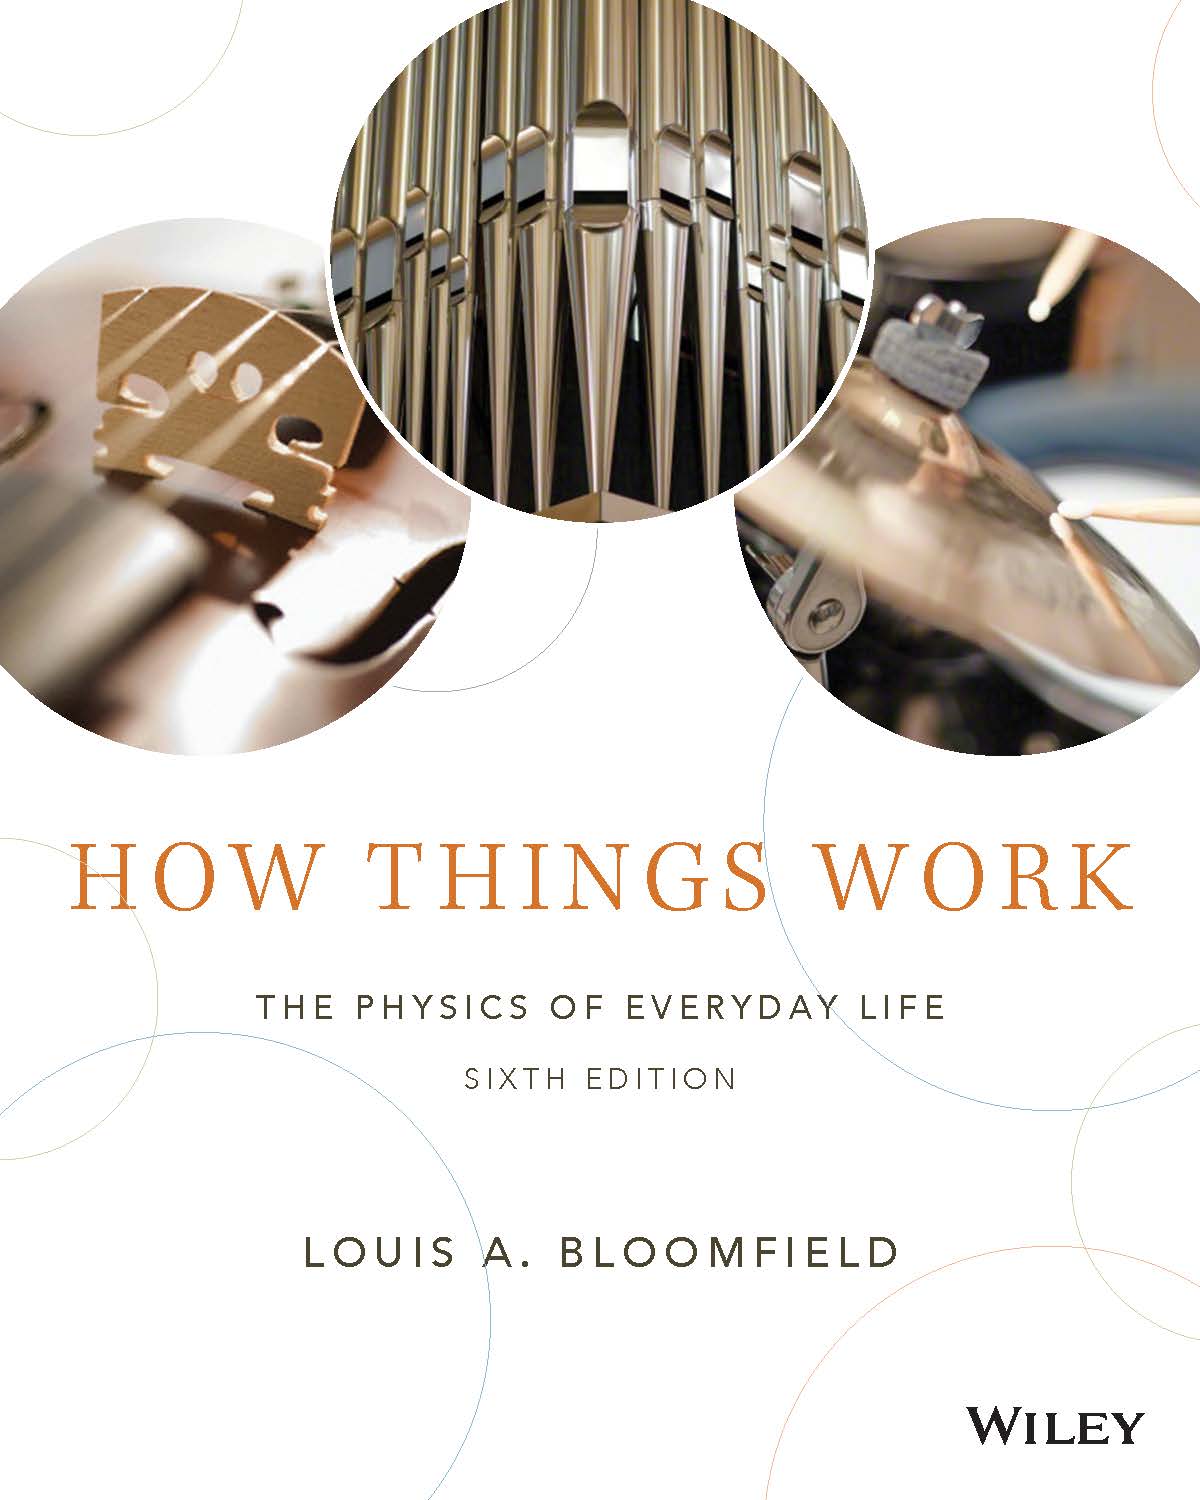 How Things Work: The Physics of Everyday Life, 6th Edition